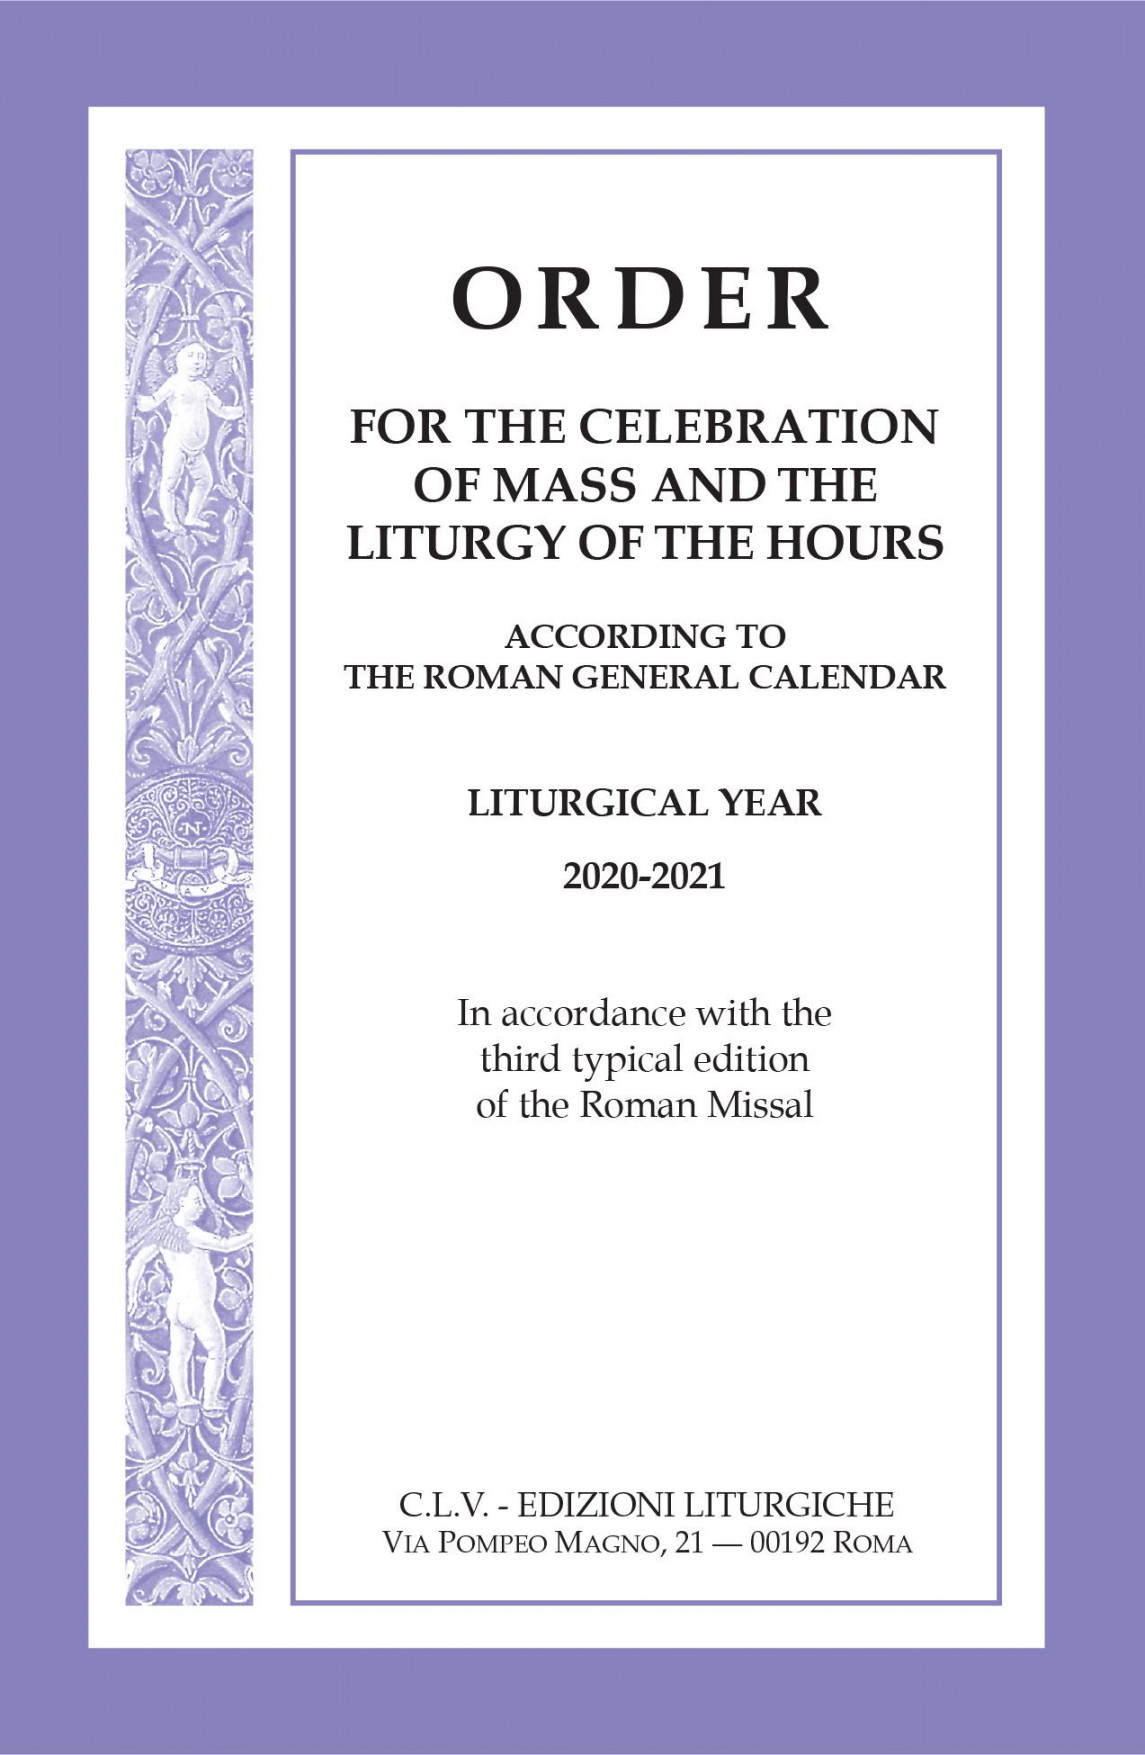 Liturgy Of The Hours  Printable  Liturgy of the hours